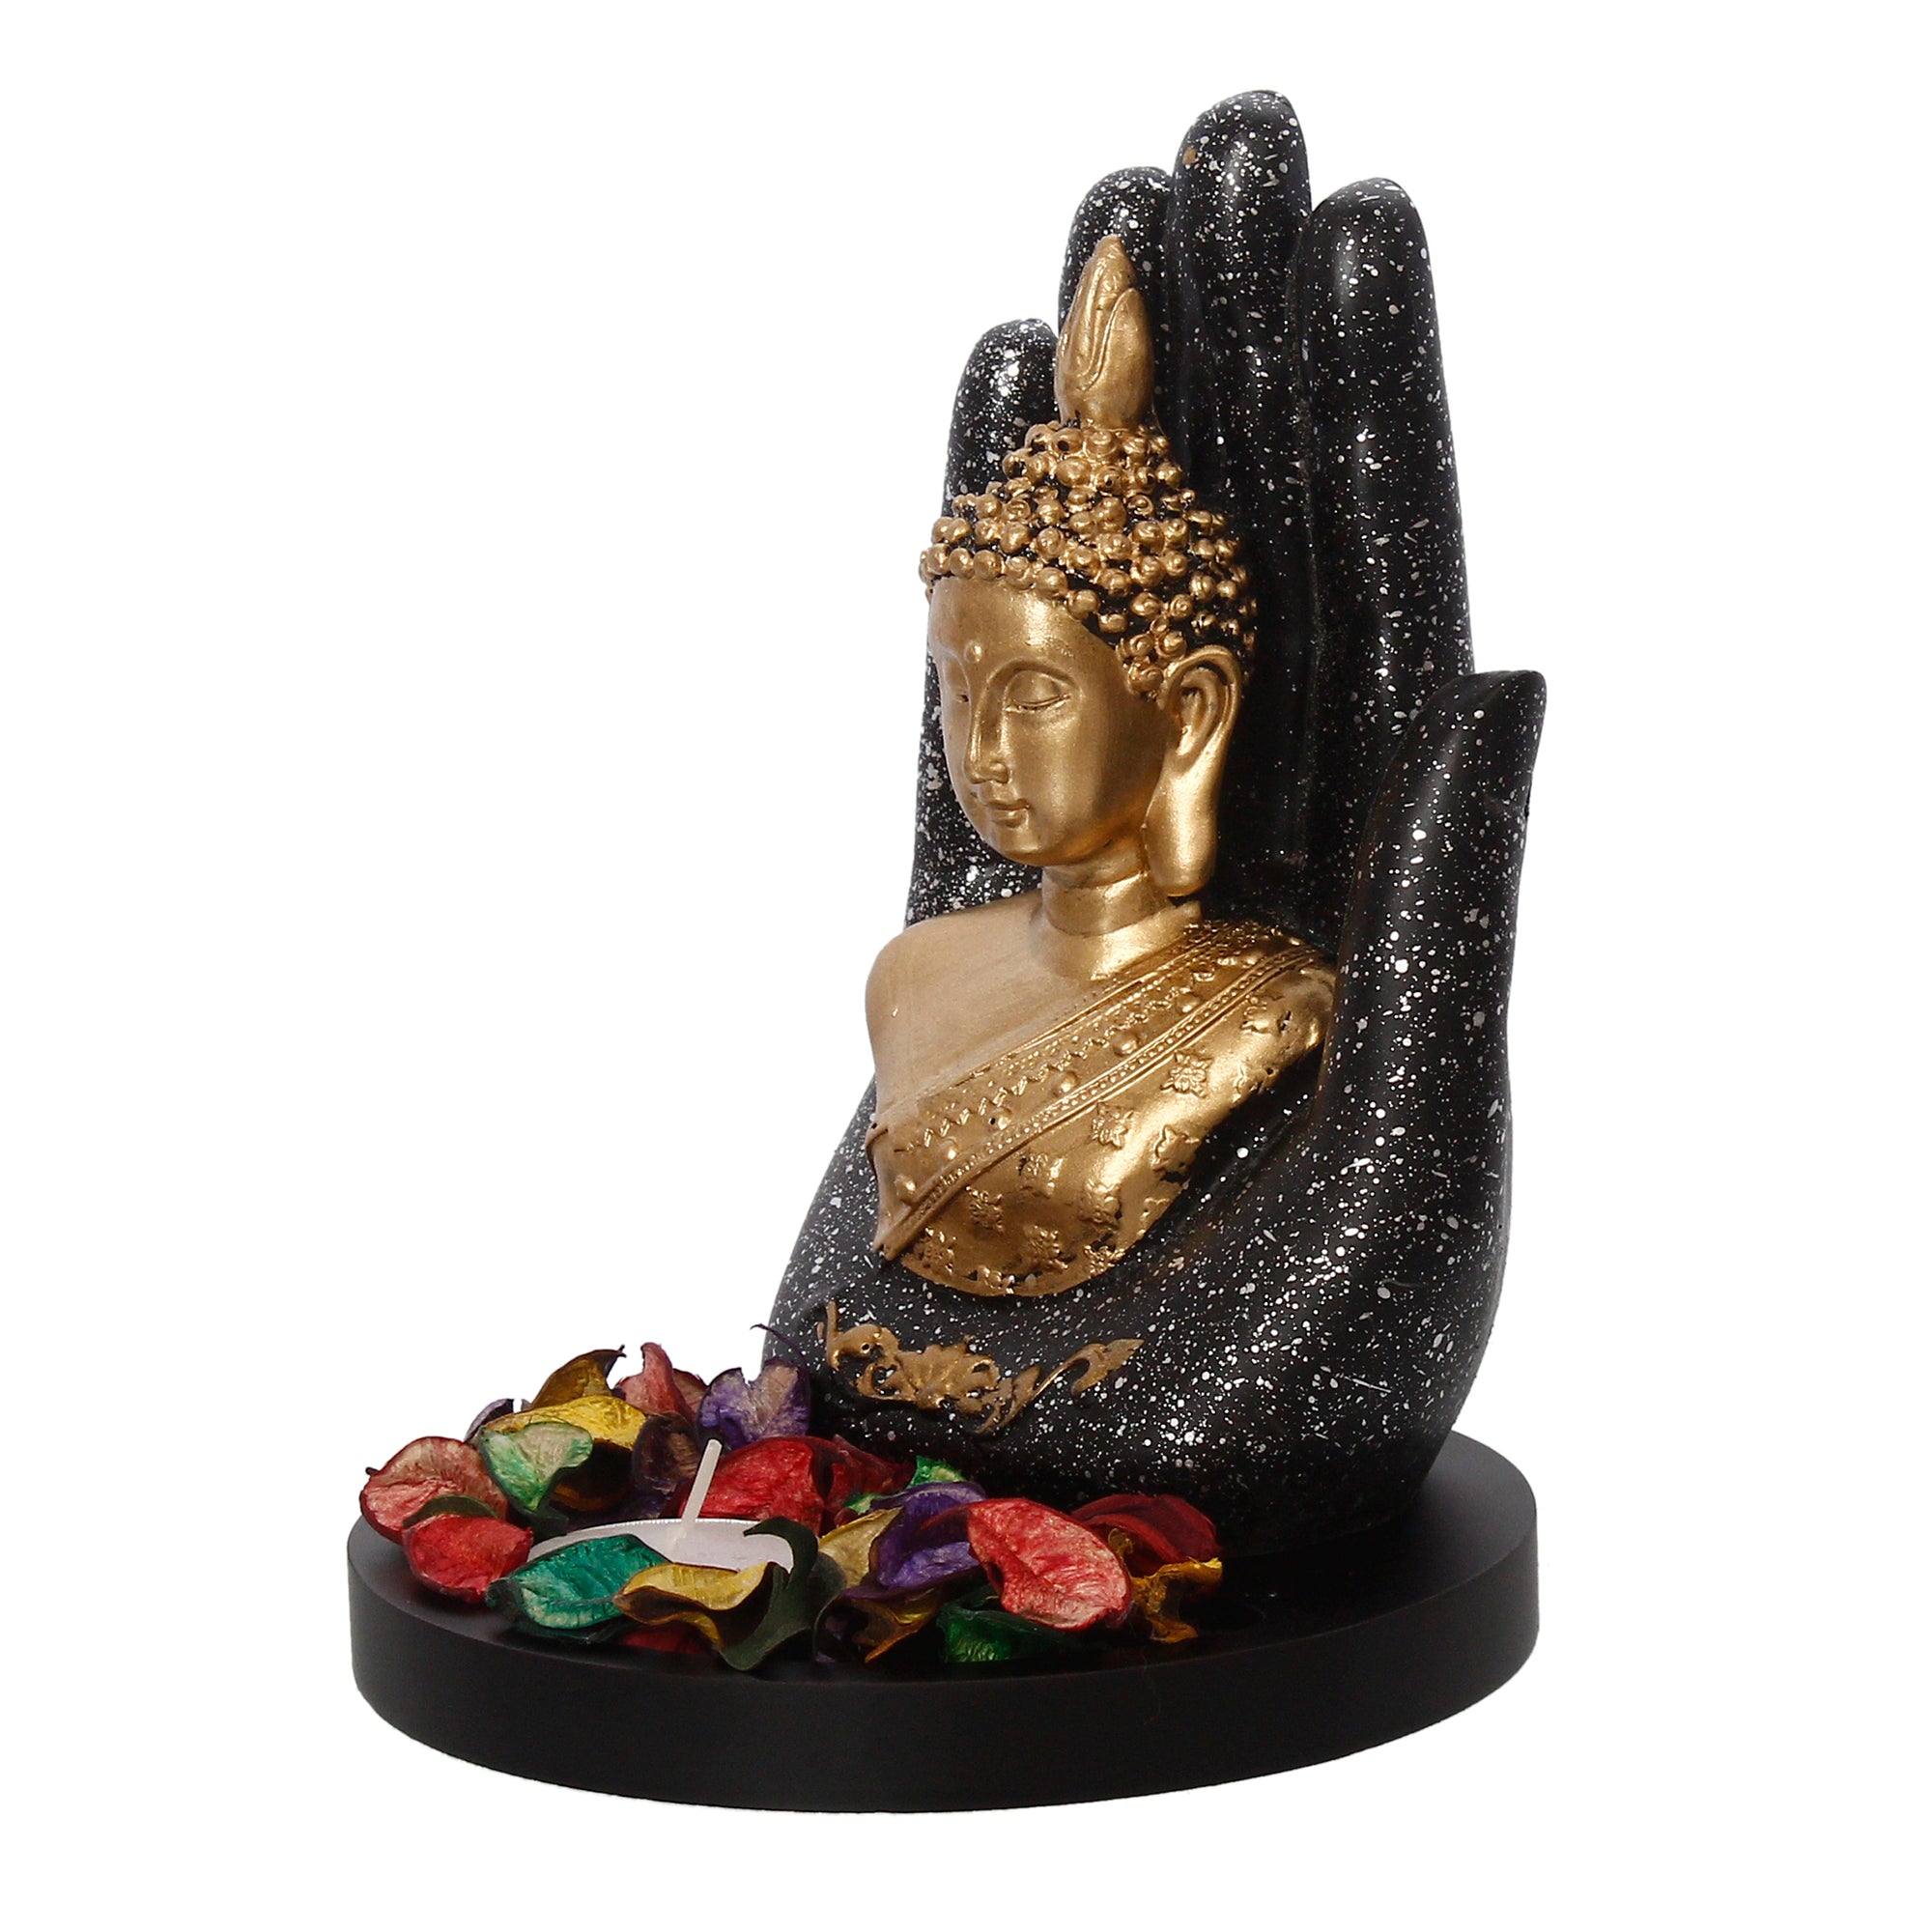 Polyresin Black and Golden Handcrafted Palm Buddha Statue with Wooden Base, Fragranced Petals and Tealight 5